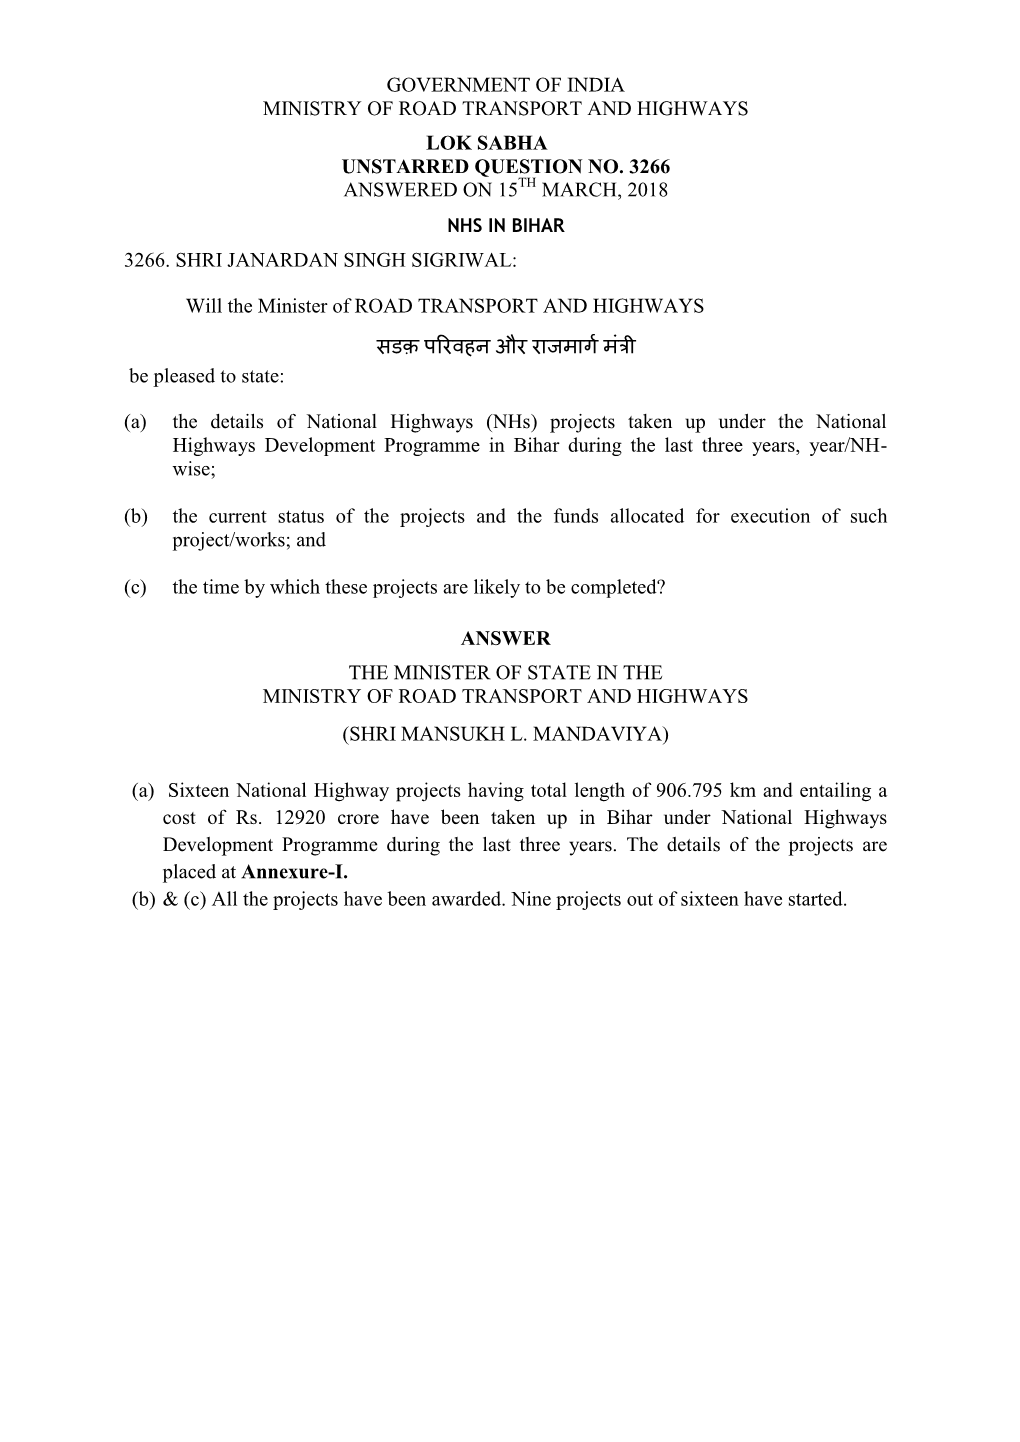 Government of India Ministry of Road Transport and Highways Lok Sabha Unstarred Question No. 3266 Answered on 15 March, 2018